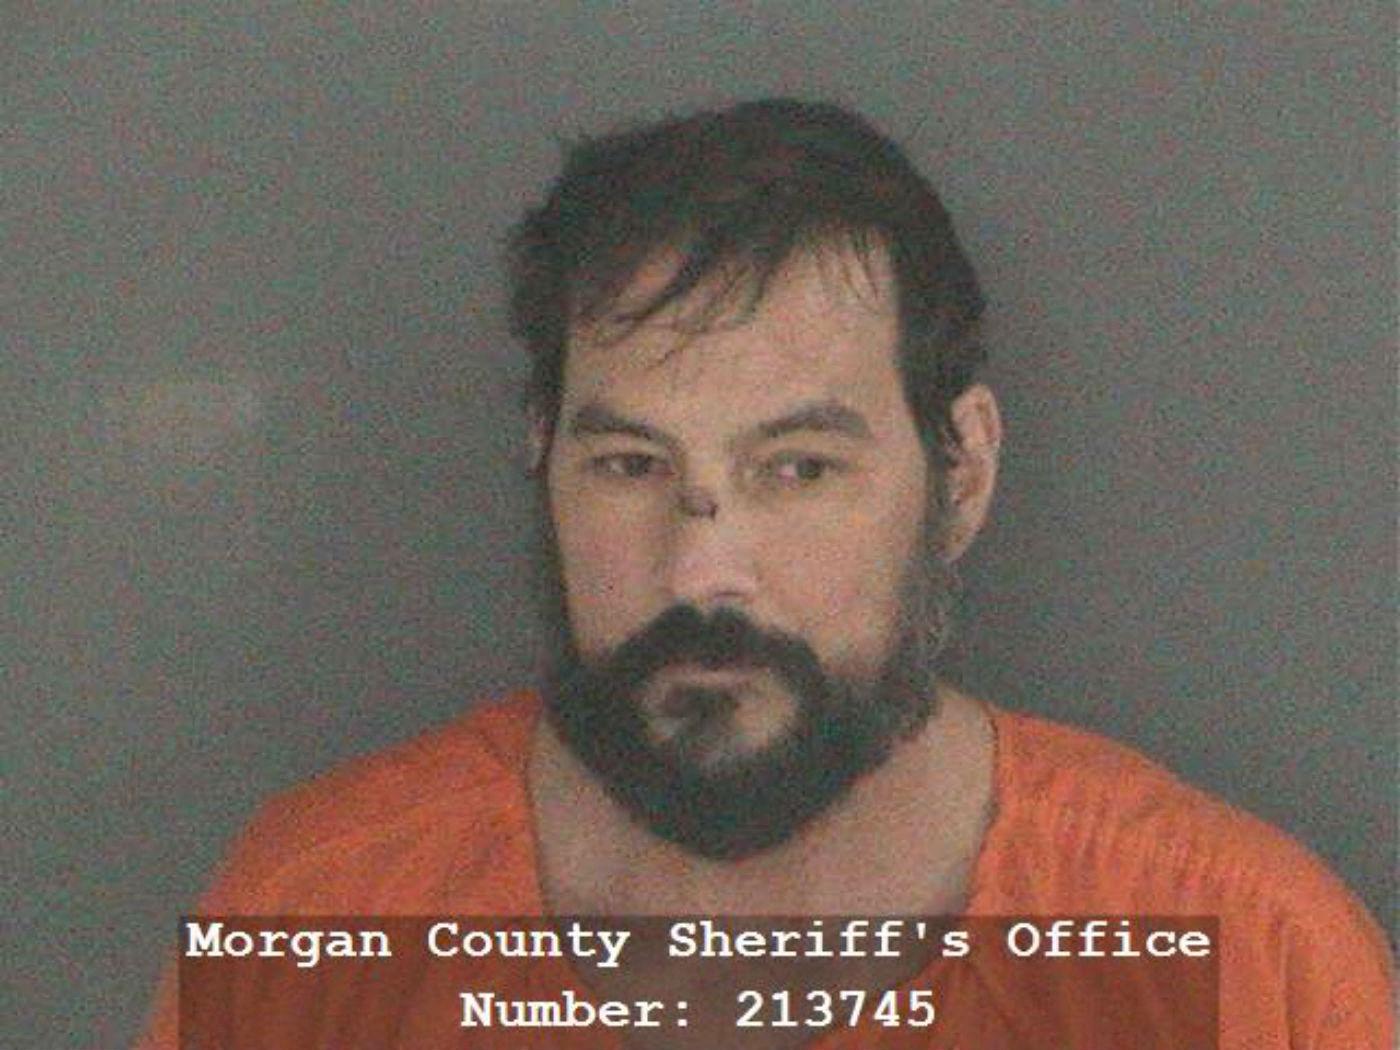 Tyler Christopher, was arrested in Indiana for alleged public intoxication